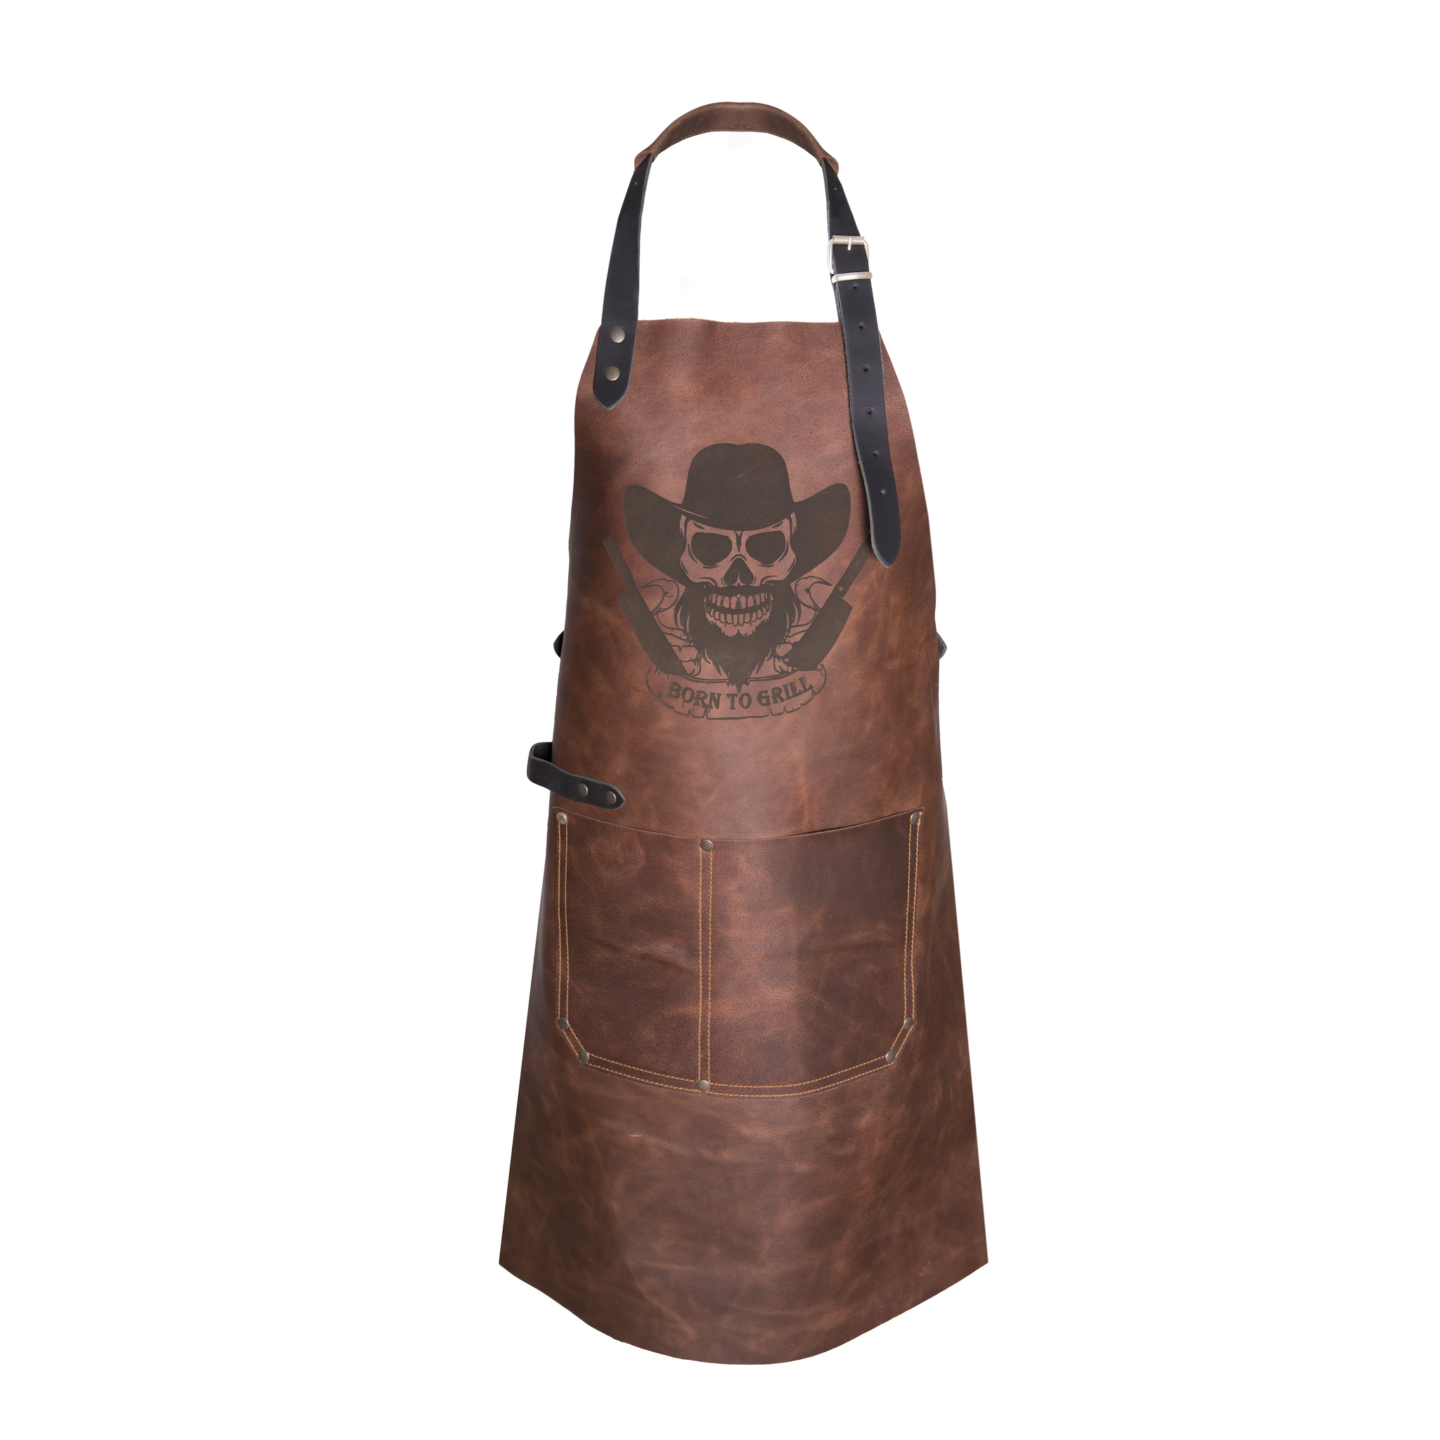 Brickwalls & Barricades “Born To Grill” Brown Tan Leather Apron – Bright and Shine – Bright and Shine